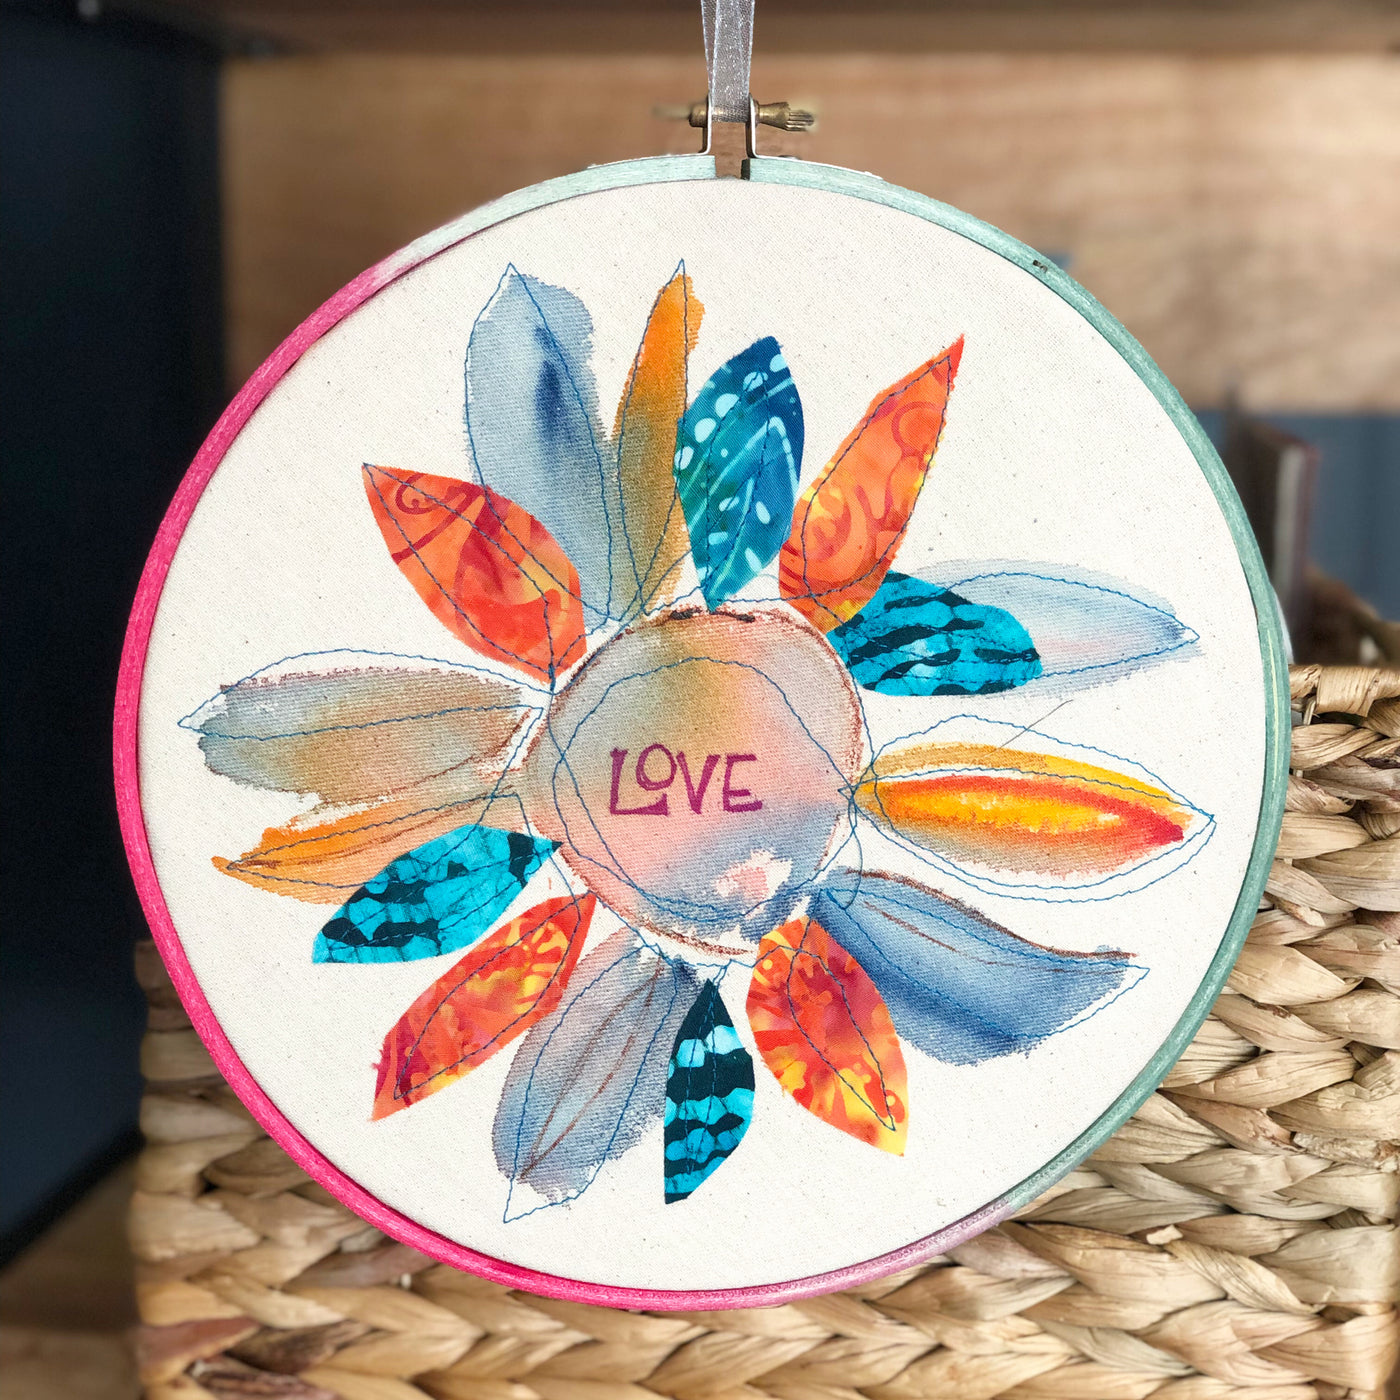 round dyed wooden hoop art, with painted and stitched fabric leaves in colors of blue and pink and green, with the word 'love' painted in the center